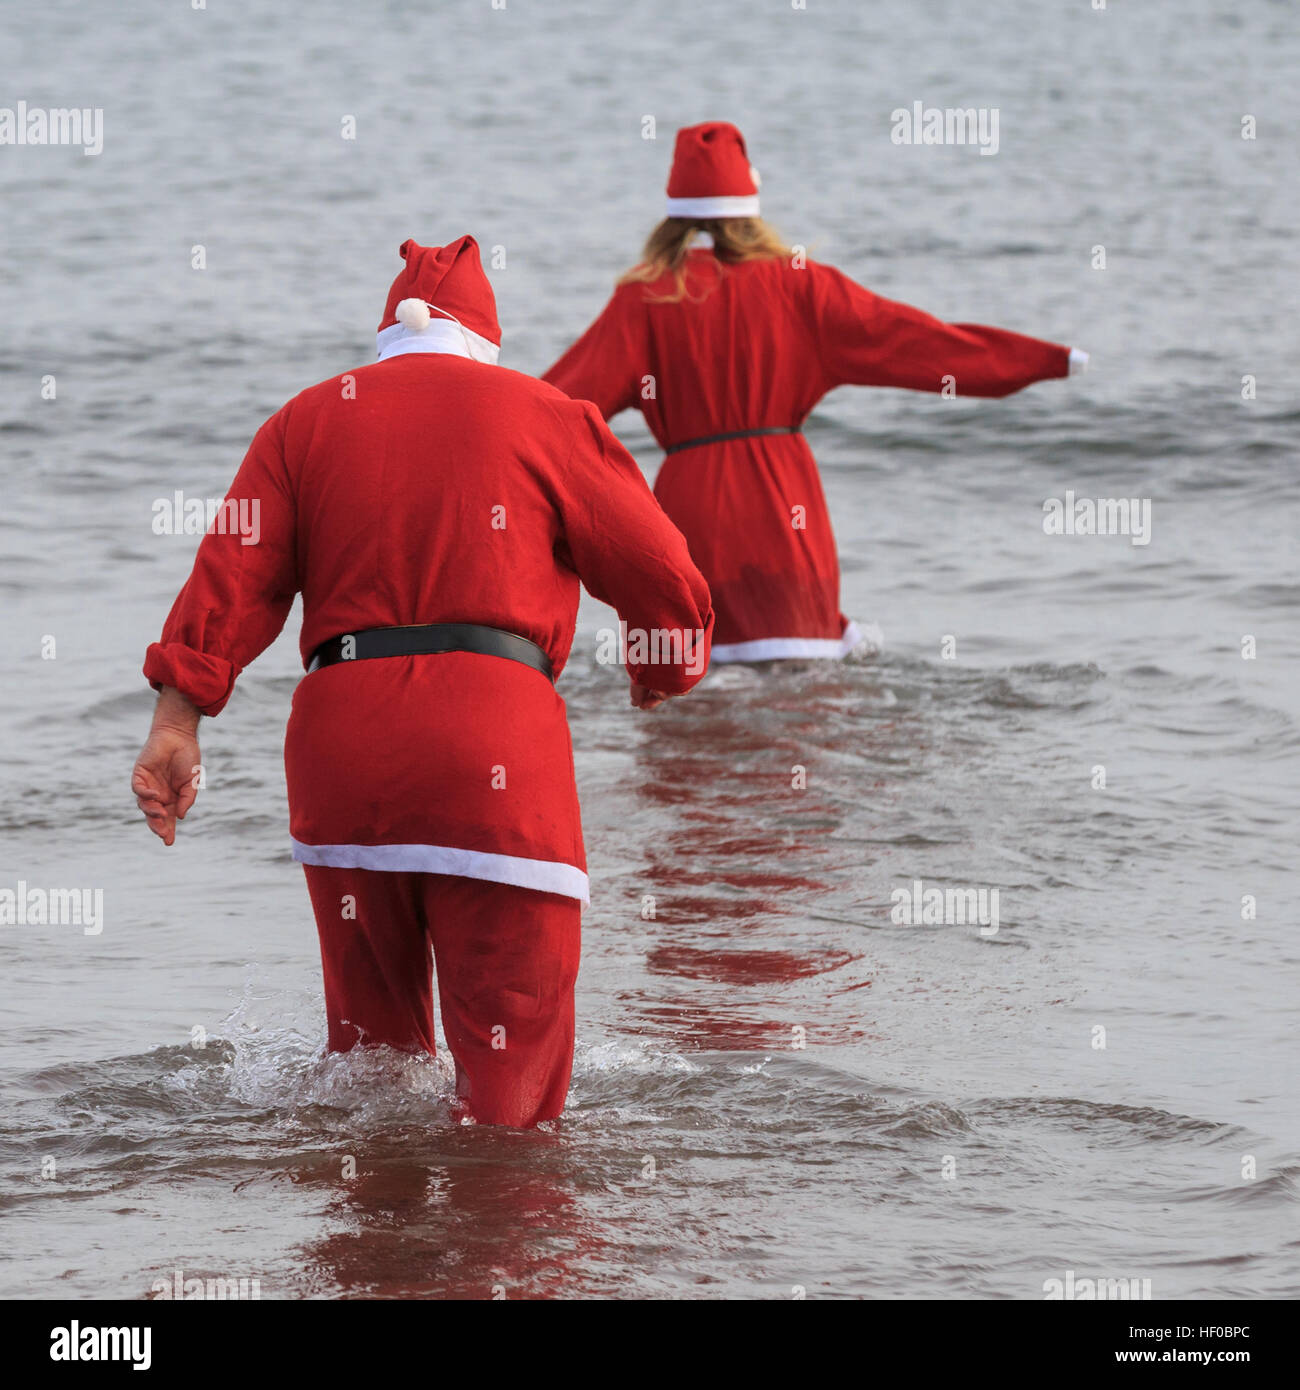 Paignton, Devon, UK, 26 December 2016. Paignton 'Walk in to the Sea', Boxing Day Dip. The annual Boxing Day tradition, common to many coastal locations right across the UK, began in Paignton in 1976. Participants generally dress up in seasonal fancy dress and raise money for the Paignton Lions, who organise the event, and other charities. Credit: Clive Jones/Alamy Live News Stock Photo